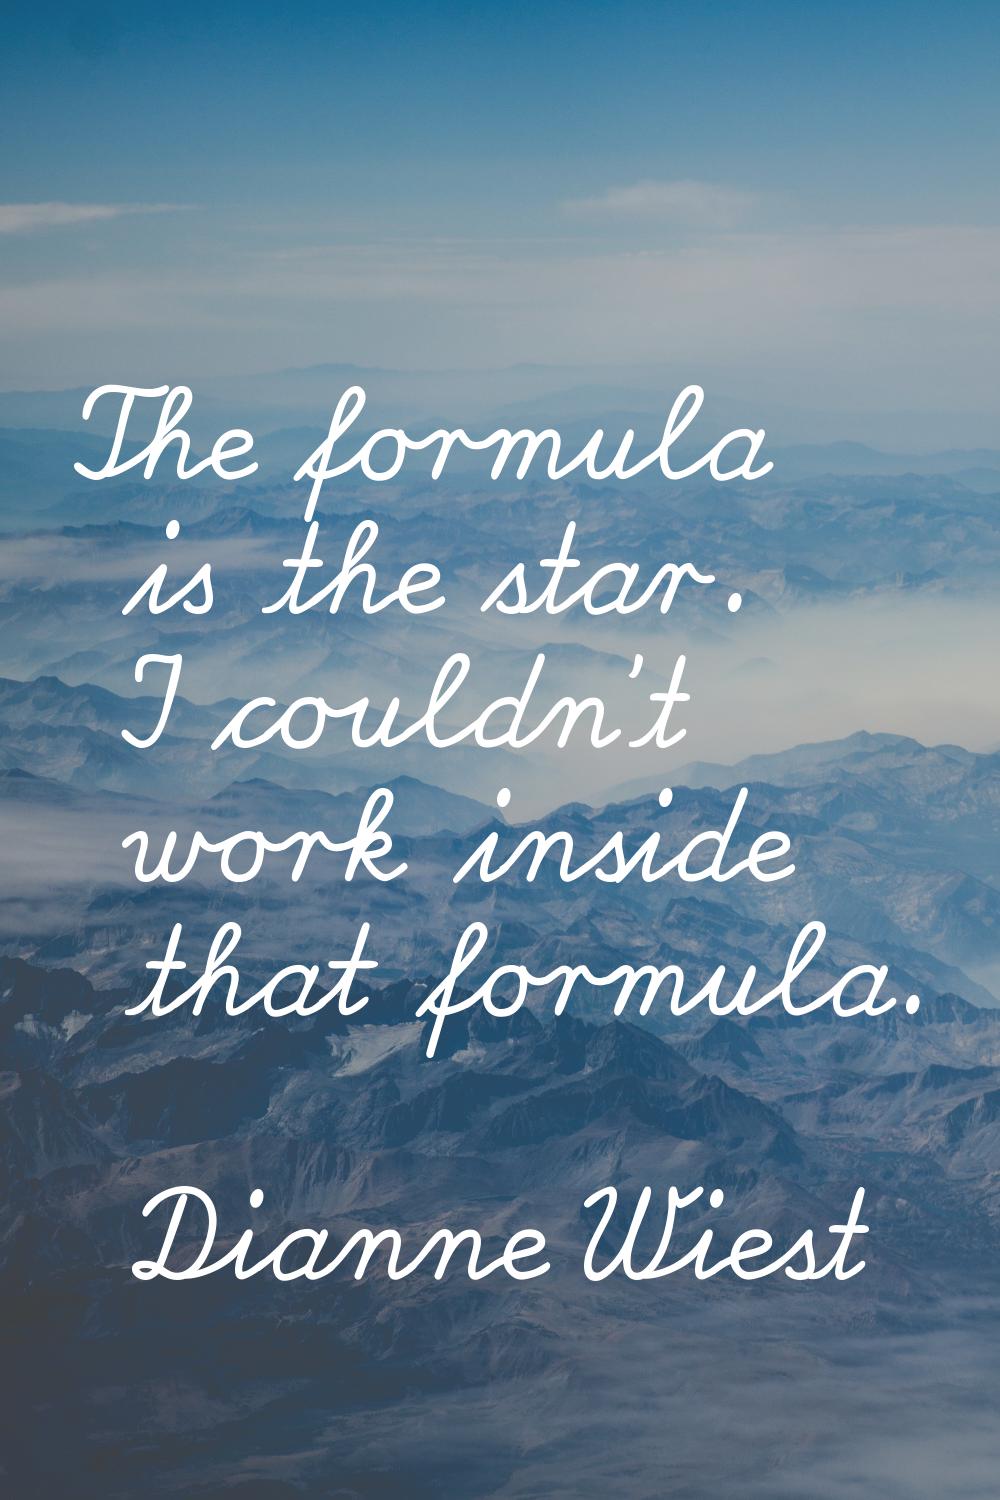 The formula is the star. I couldn't work inside that formula.